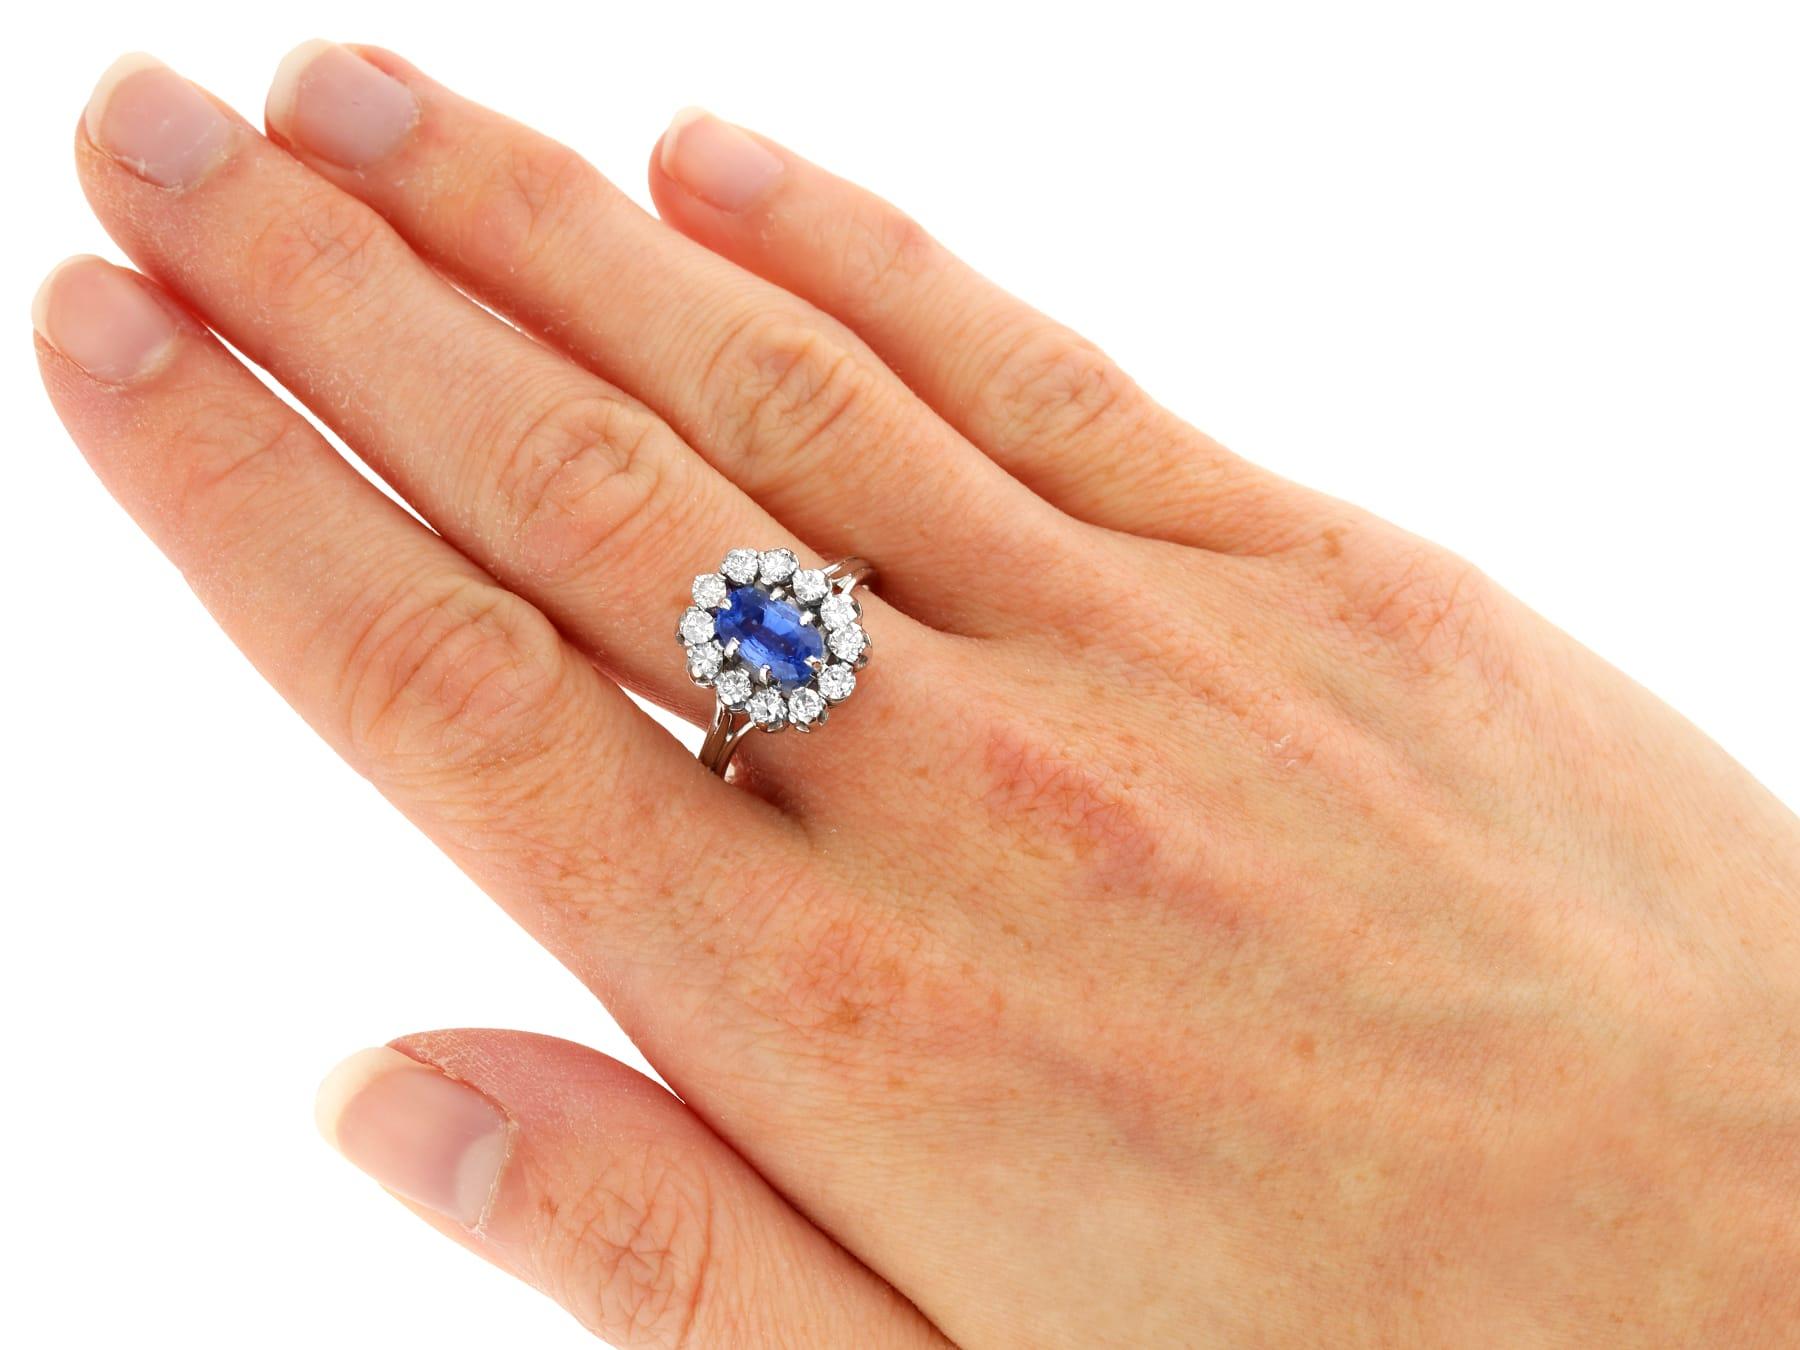 Vintage 2.36 Carat Basaltic Sapphire and Diamond 18k White Gold Cluster Ring  For Sale 3